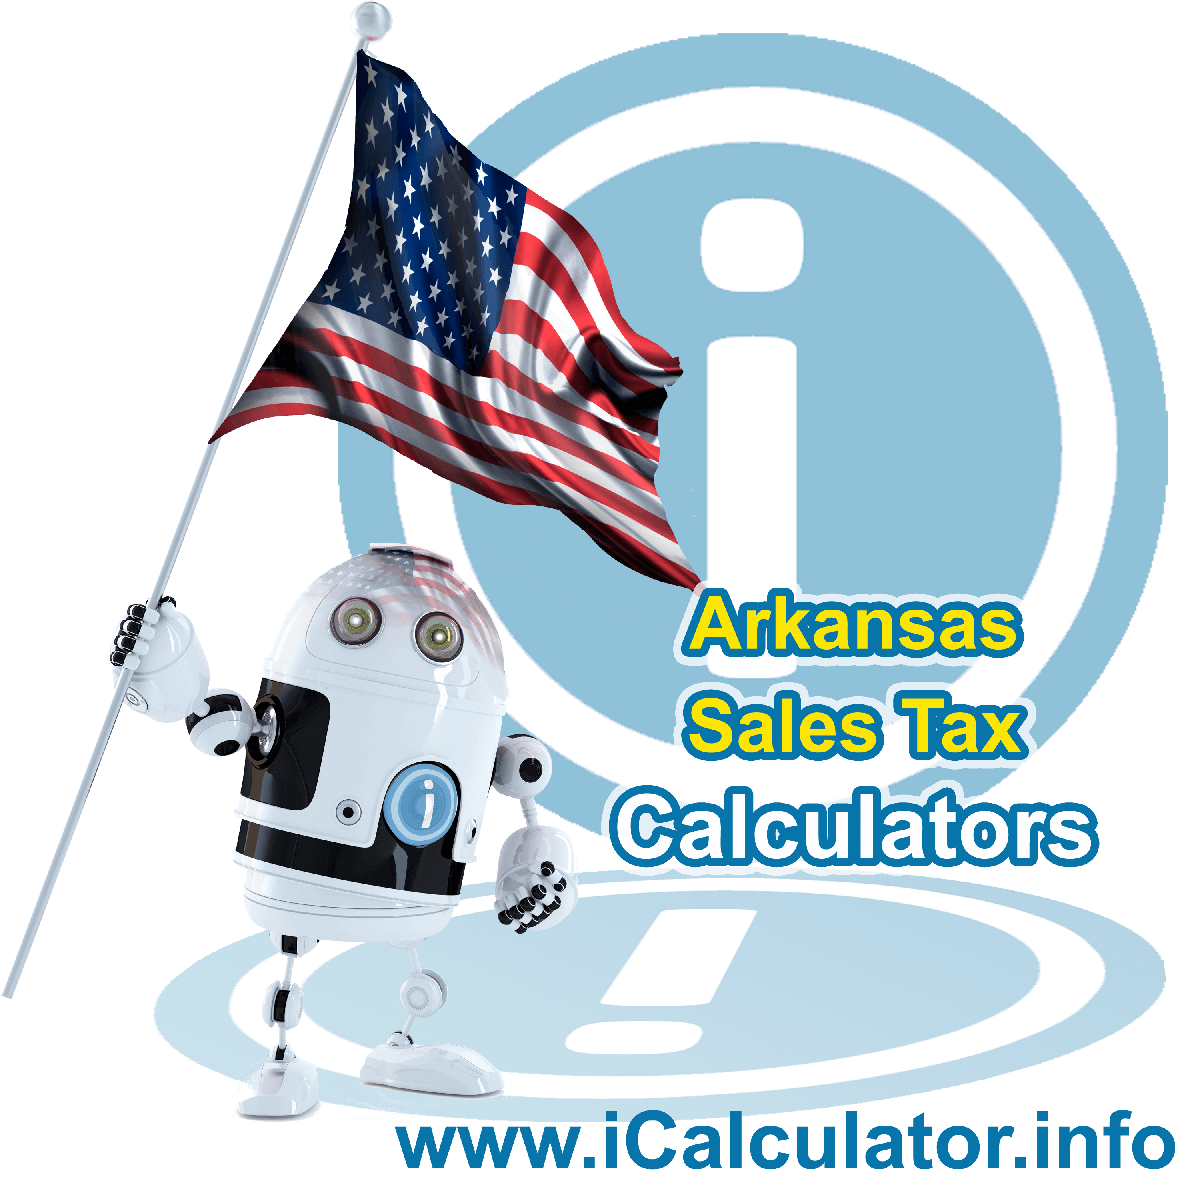 Cleburne County Sales Rates: This image illustrates a calculator robot calculating Cleburne County sales tax manually using the Cleburne County Sales Tax Formula. You can use this information to calculate Cleburne County Sales Tax manually or use the Cleburne County Sales Tax Calculator to calculate sales tax online.